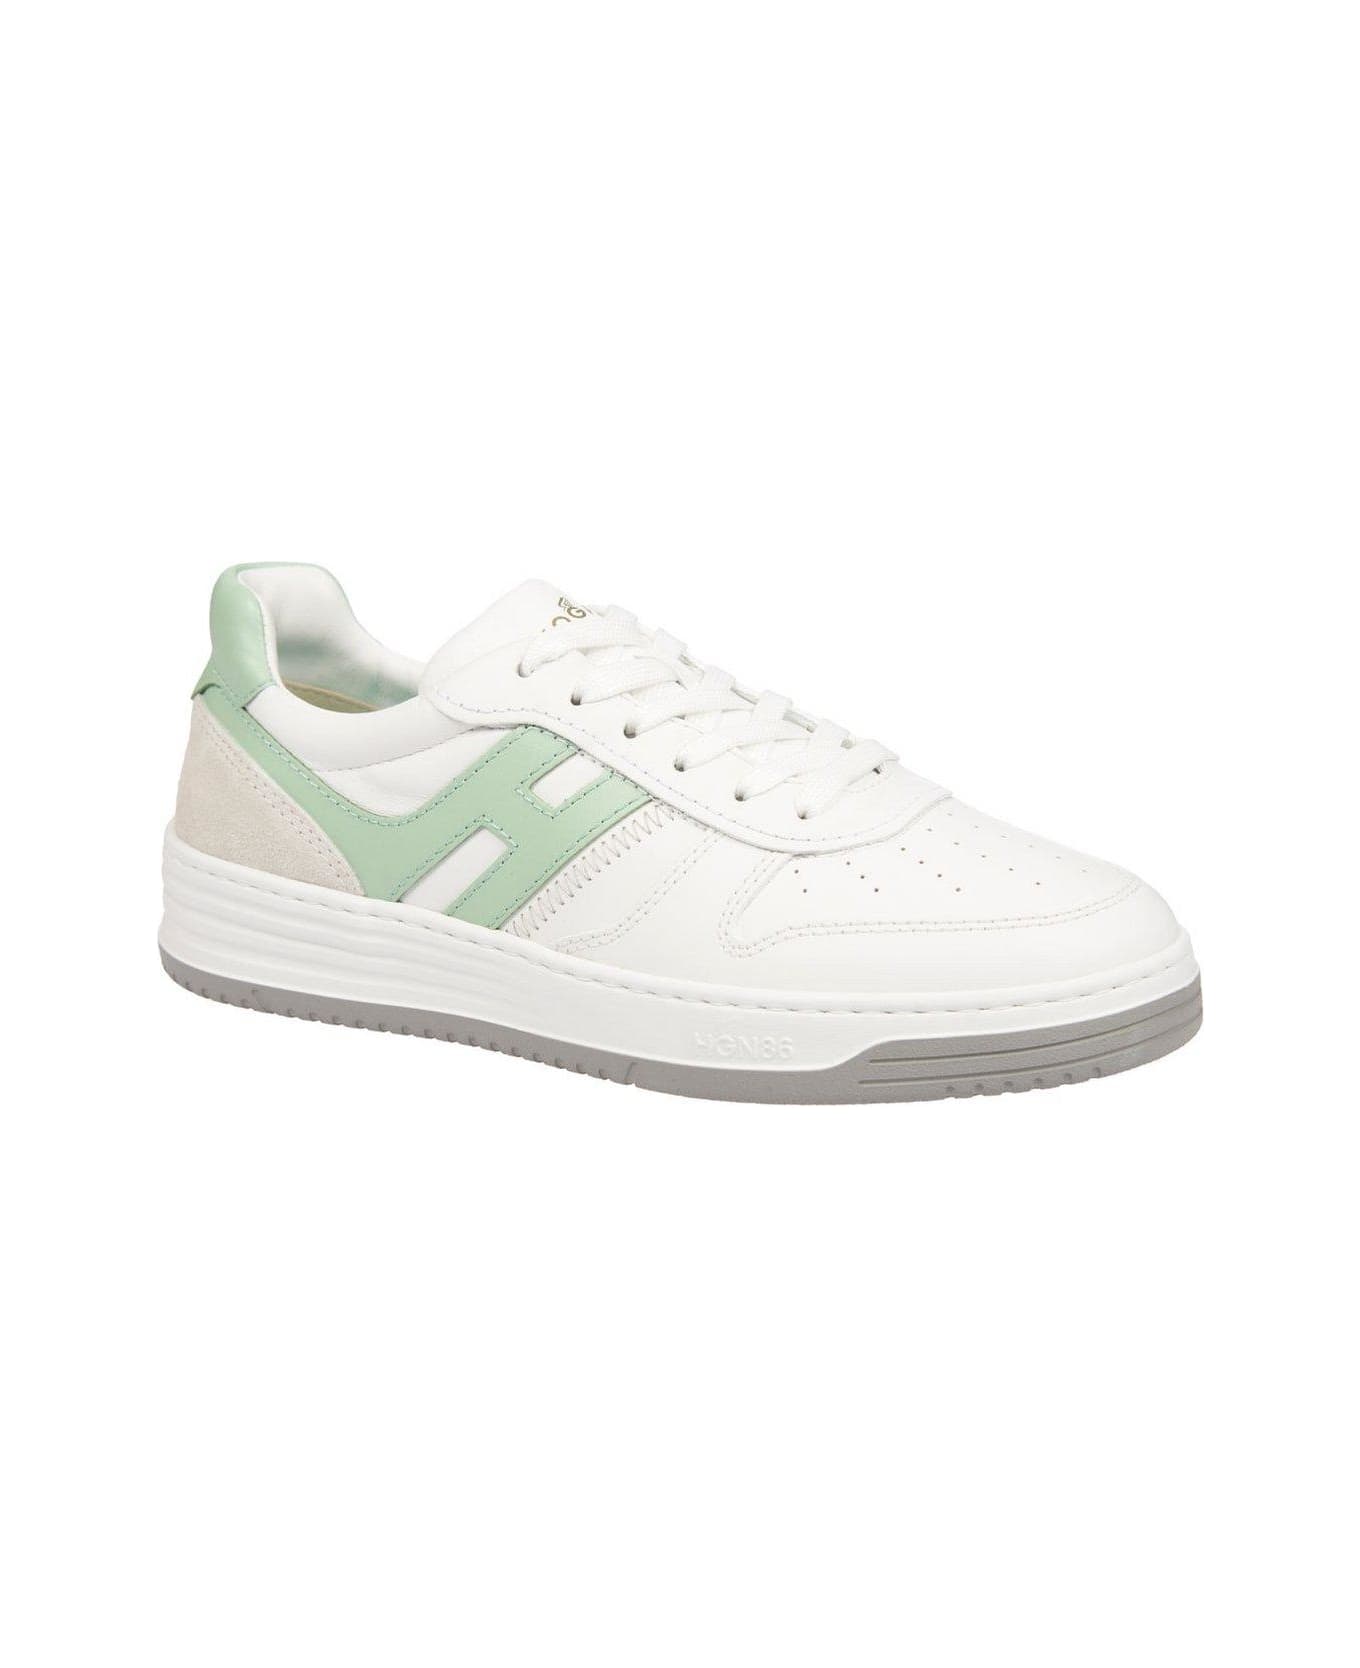 Hogan H630 Lace-up Sneakers - White